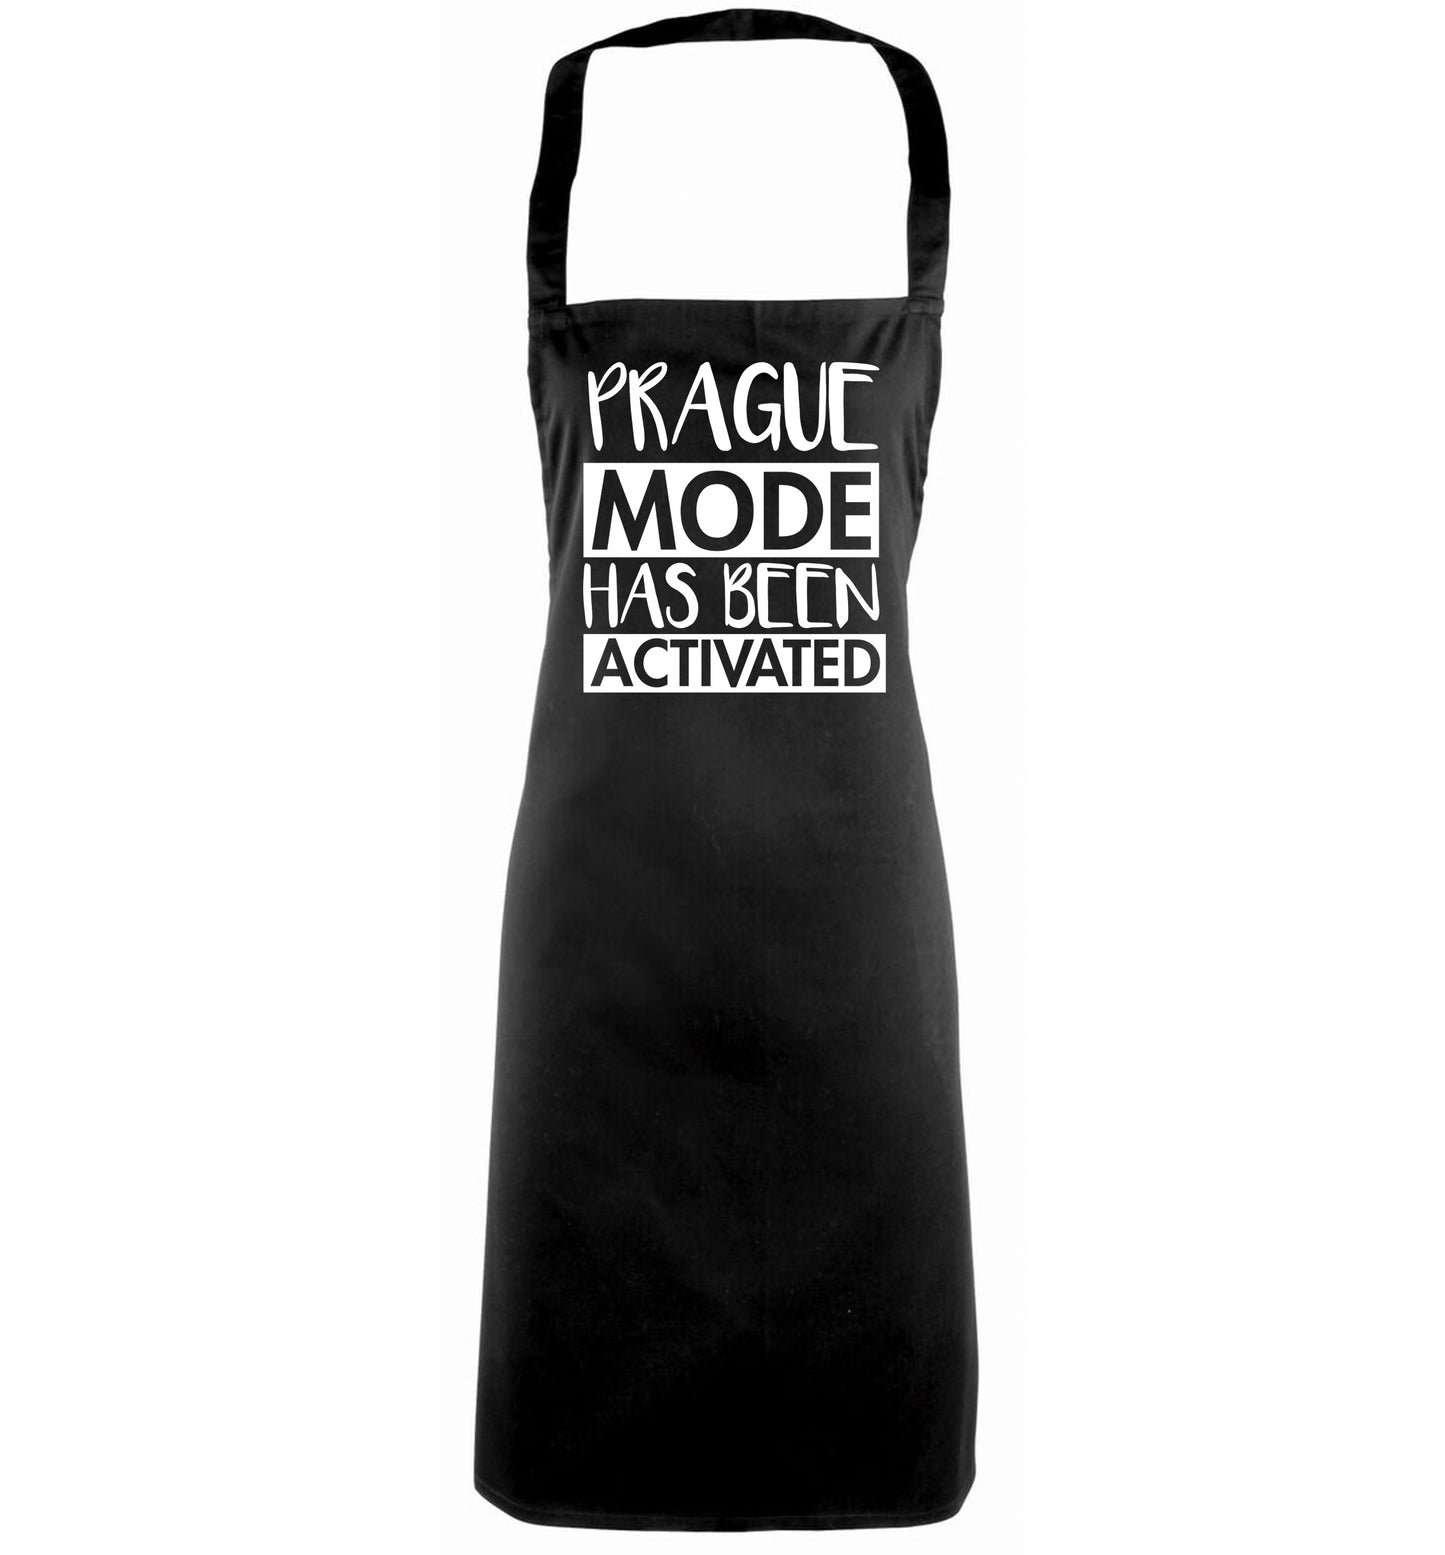 Prague mode has been activated black apron